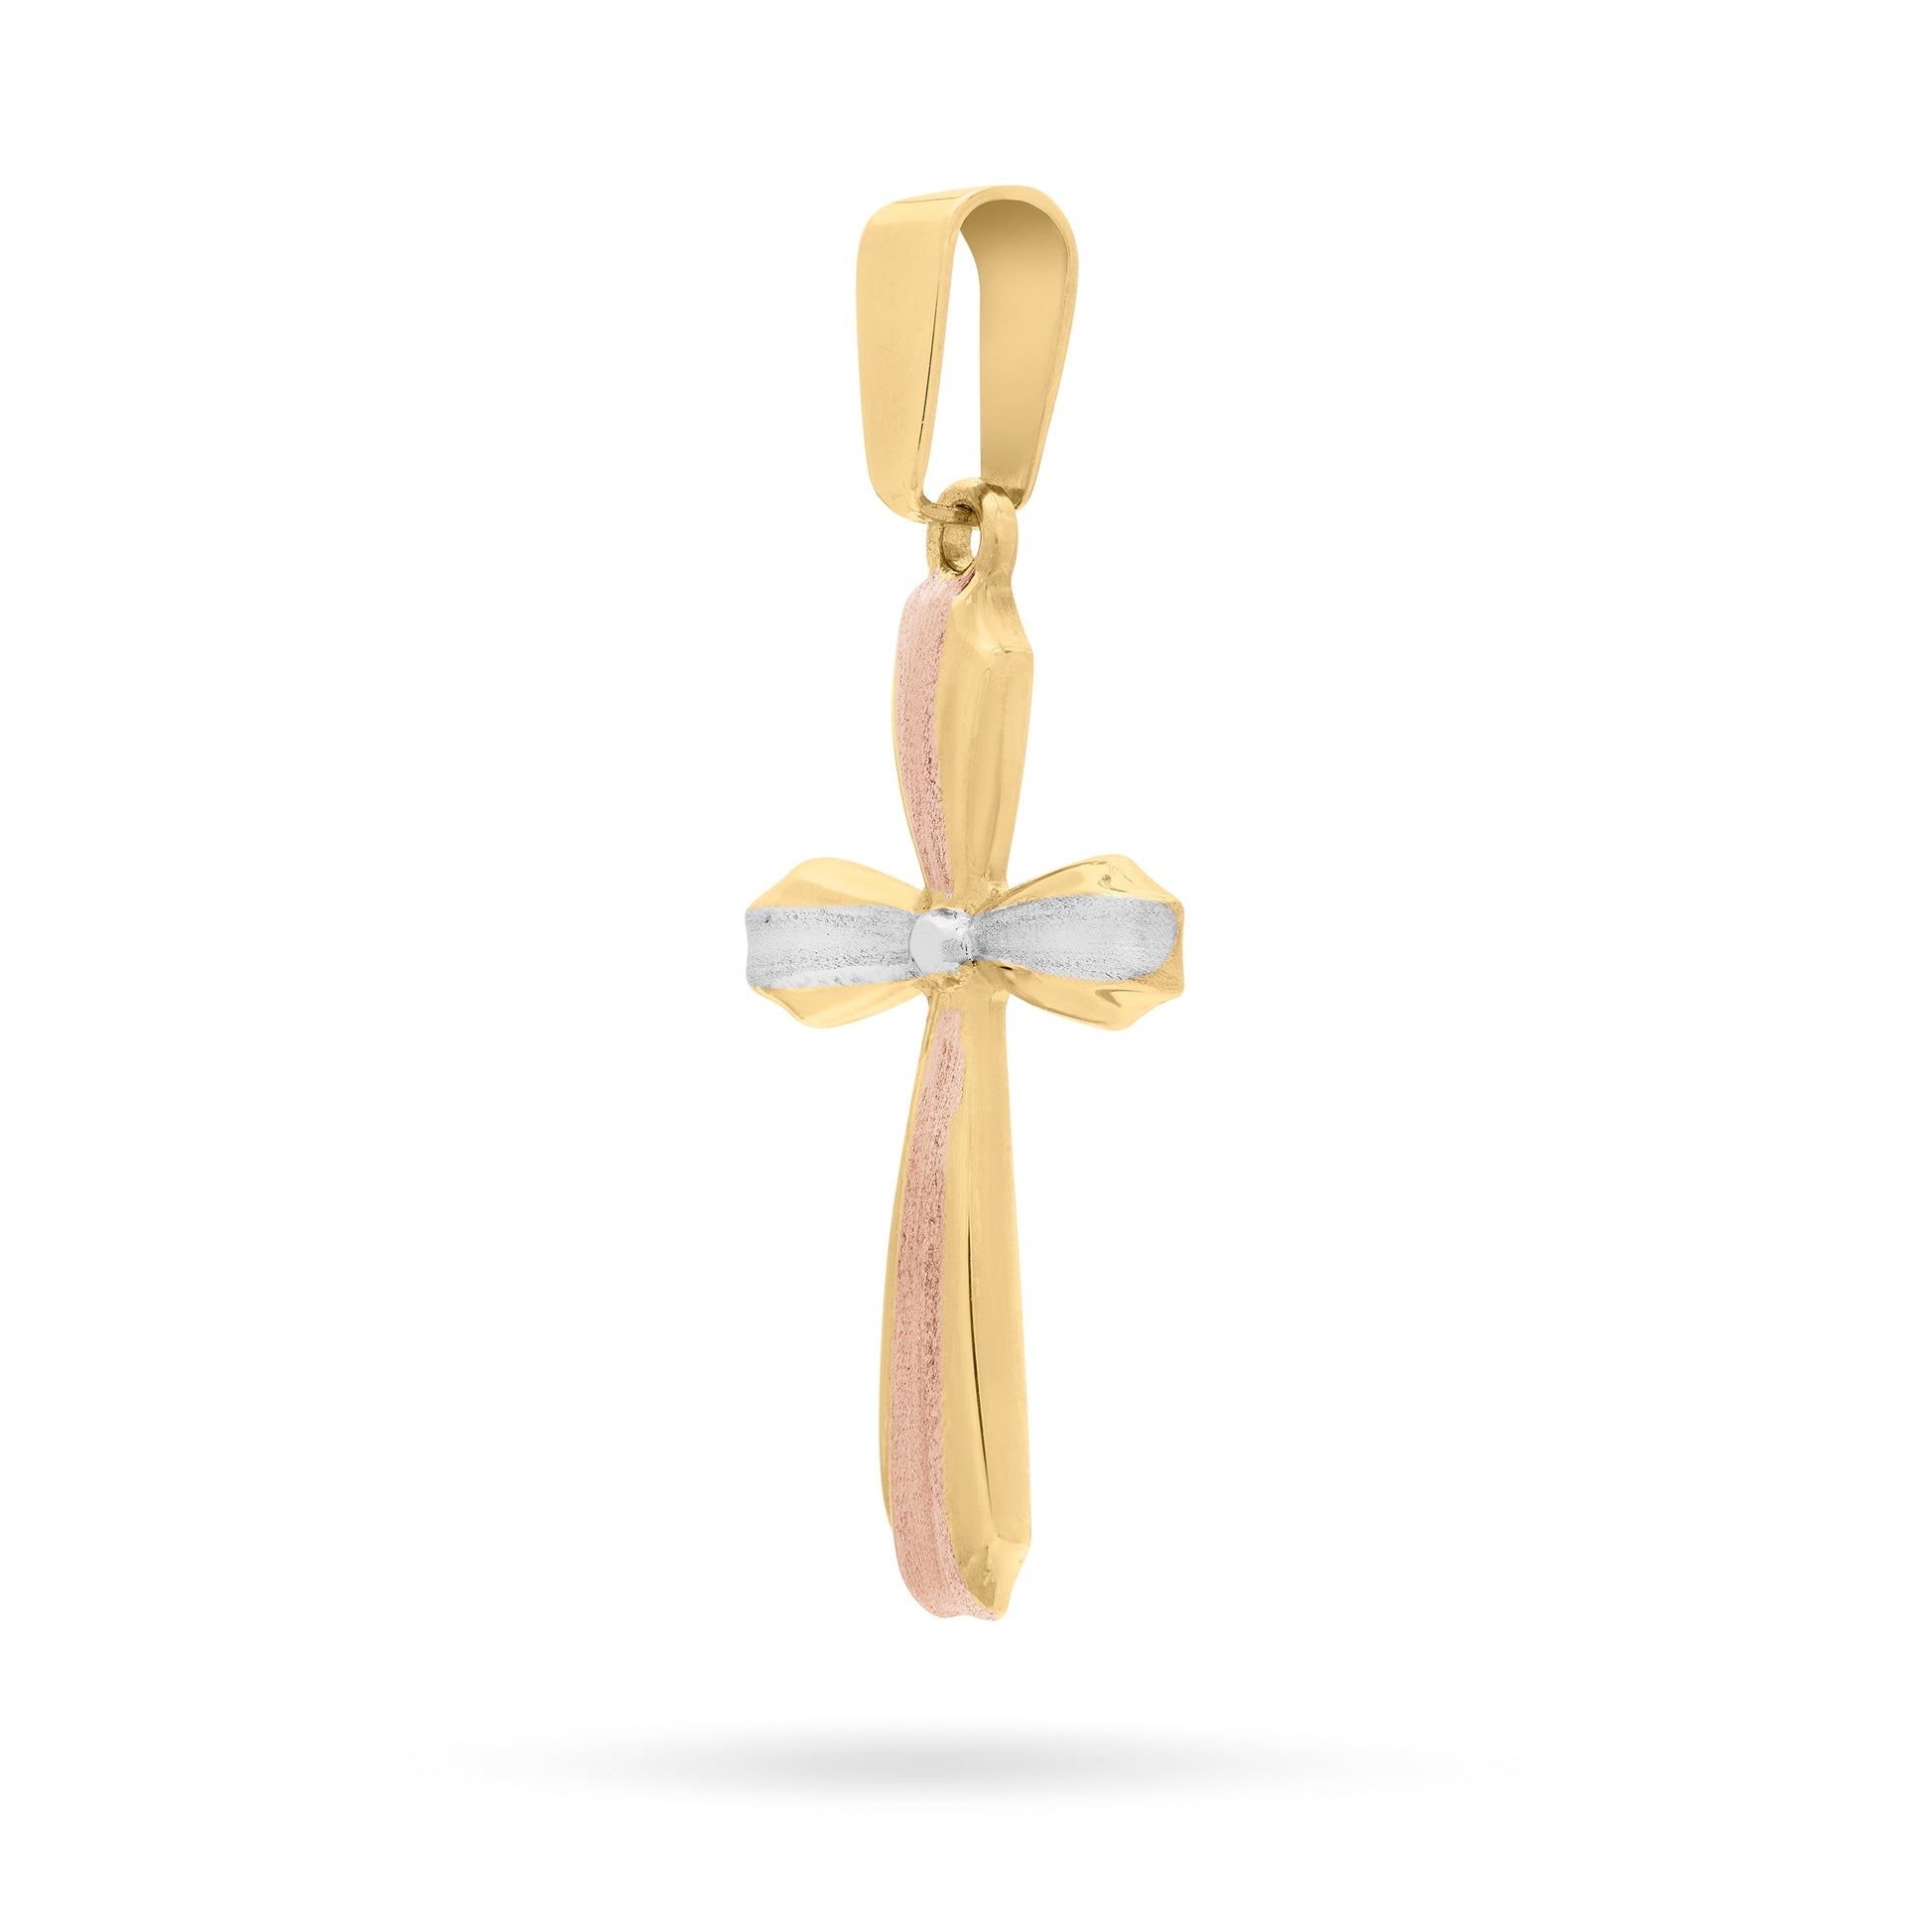 Mondo Cattolico Pendant Yellow Gold Flower Cross Pendant With White Gold and Rose Gold Details